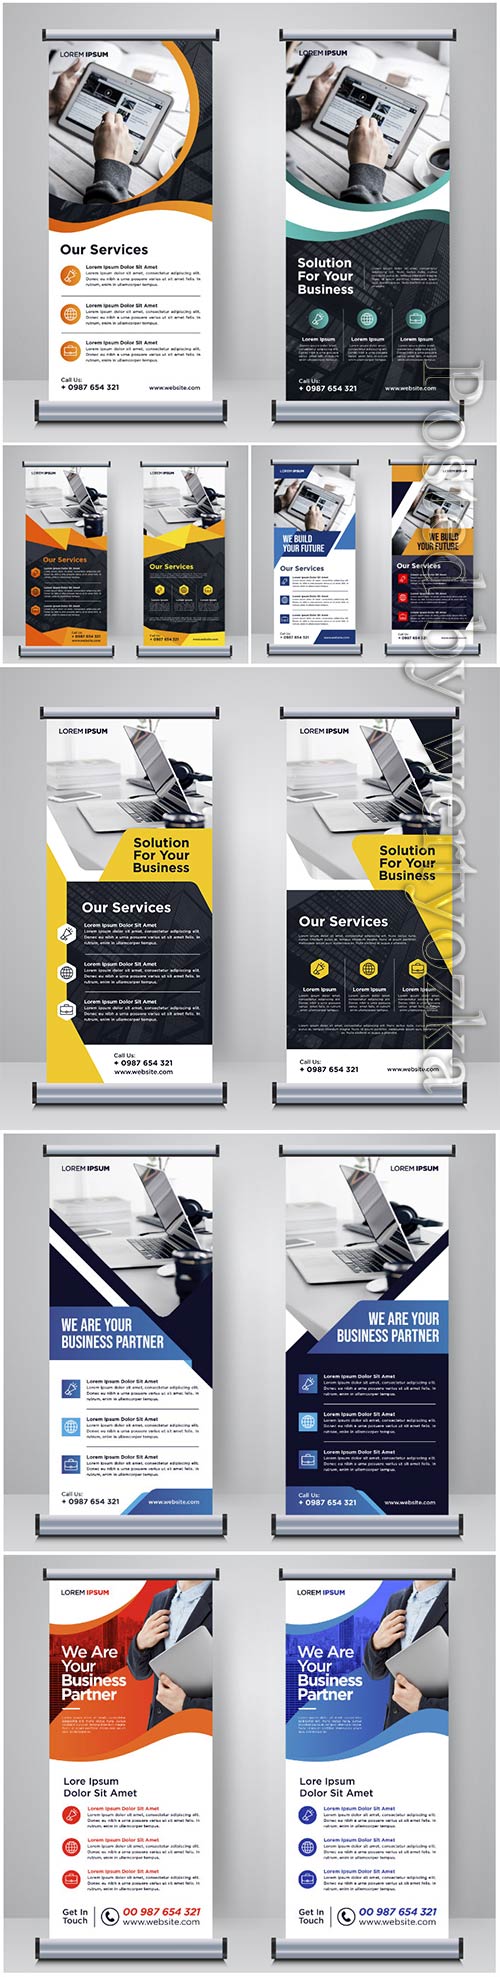 Corporate roll up or banner design template vector